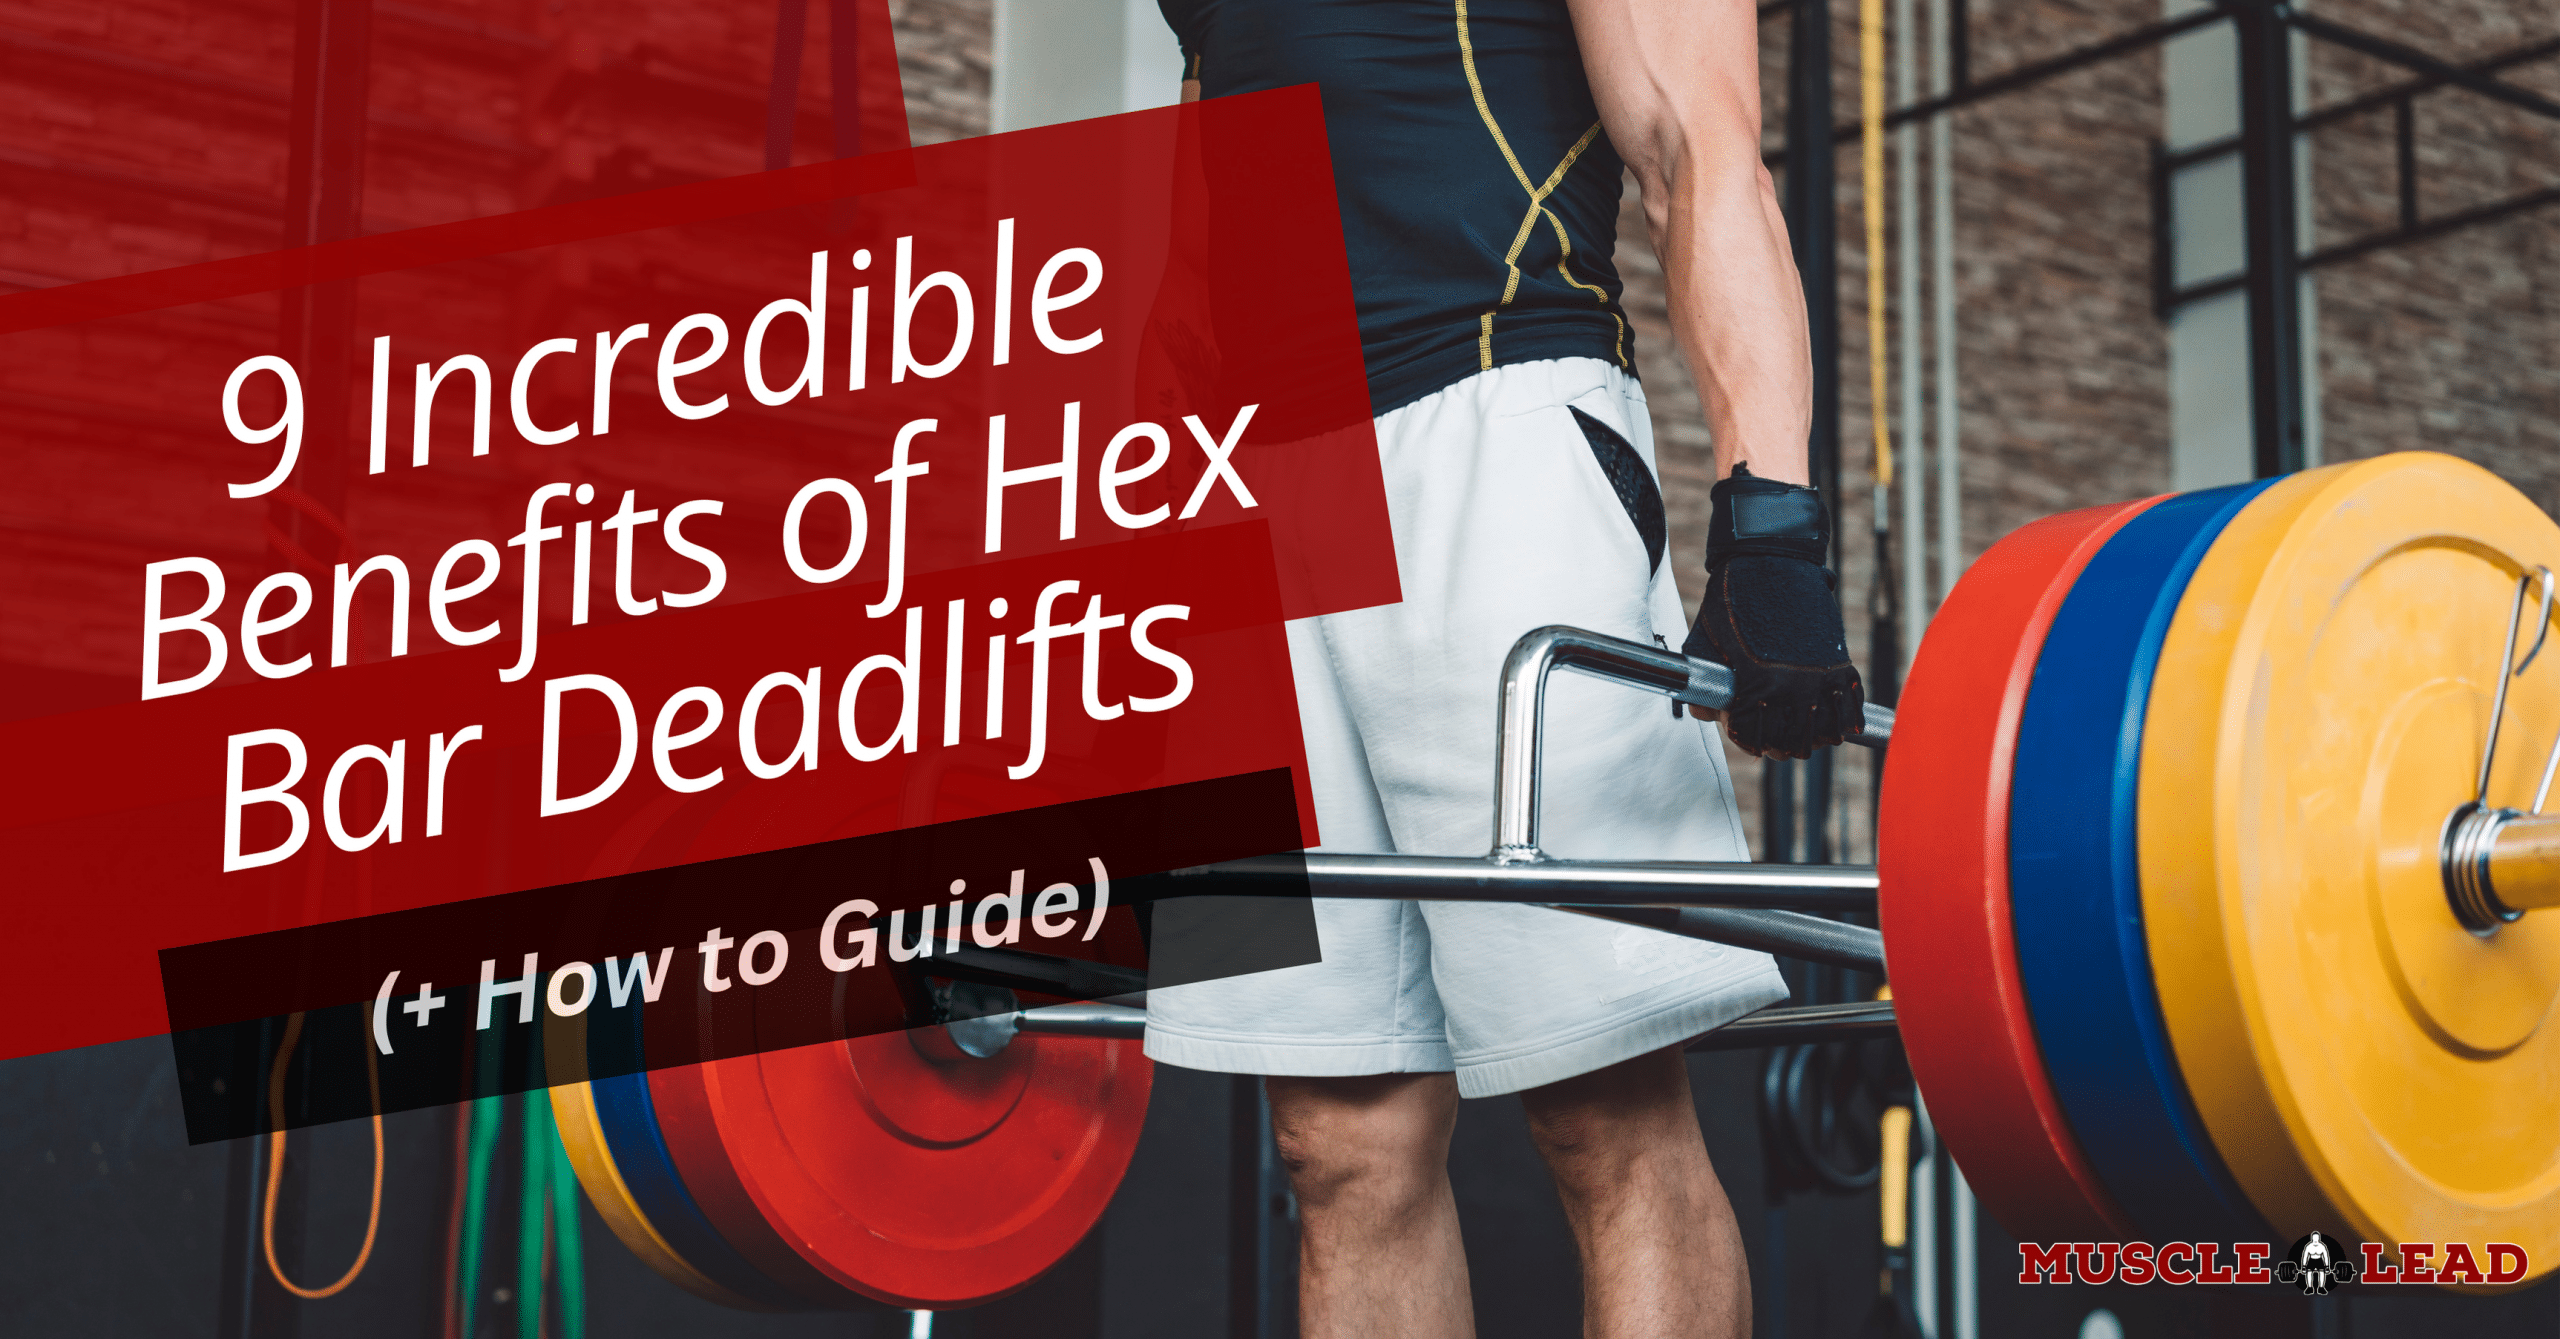 9 Incredible Benefits of Hex Bar Deadlifts (+ How to Guide)